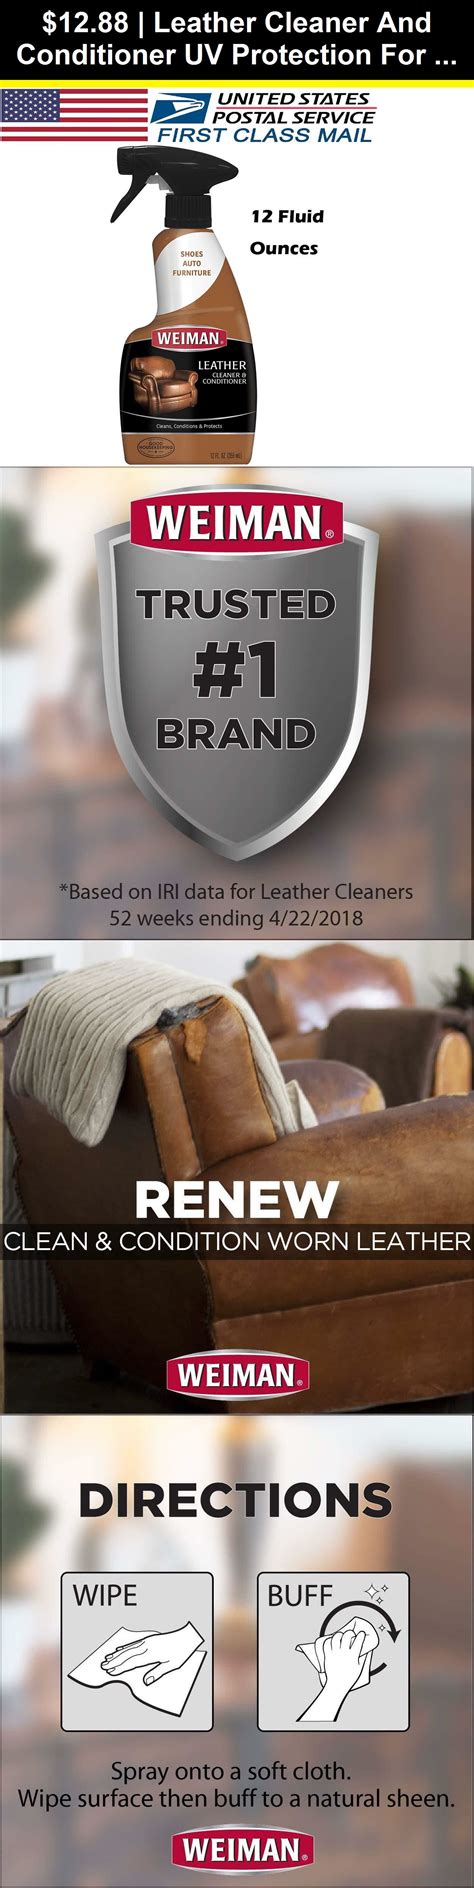 Choosing the right leather cleaner to make your car's leather seats and trim look their best can be a challenge since there are so many products available. Leathercrafts 28131: Leather Cleaner And Conditioner Uv ...